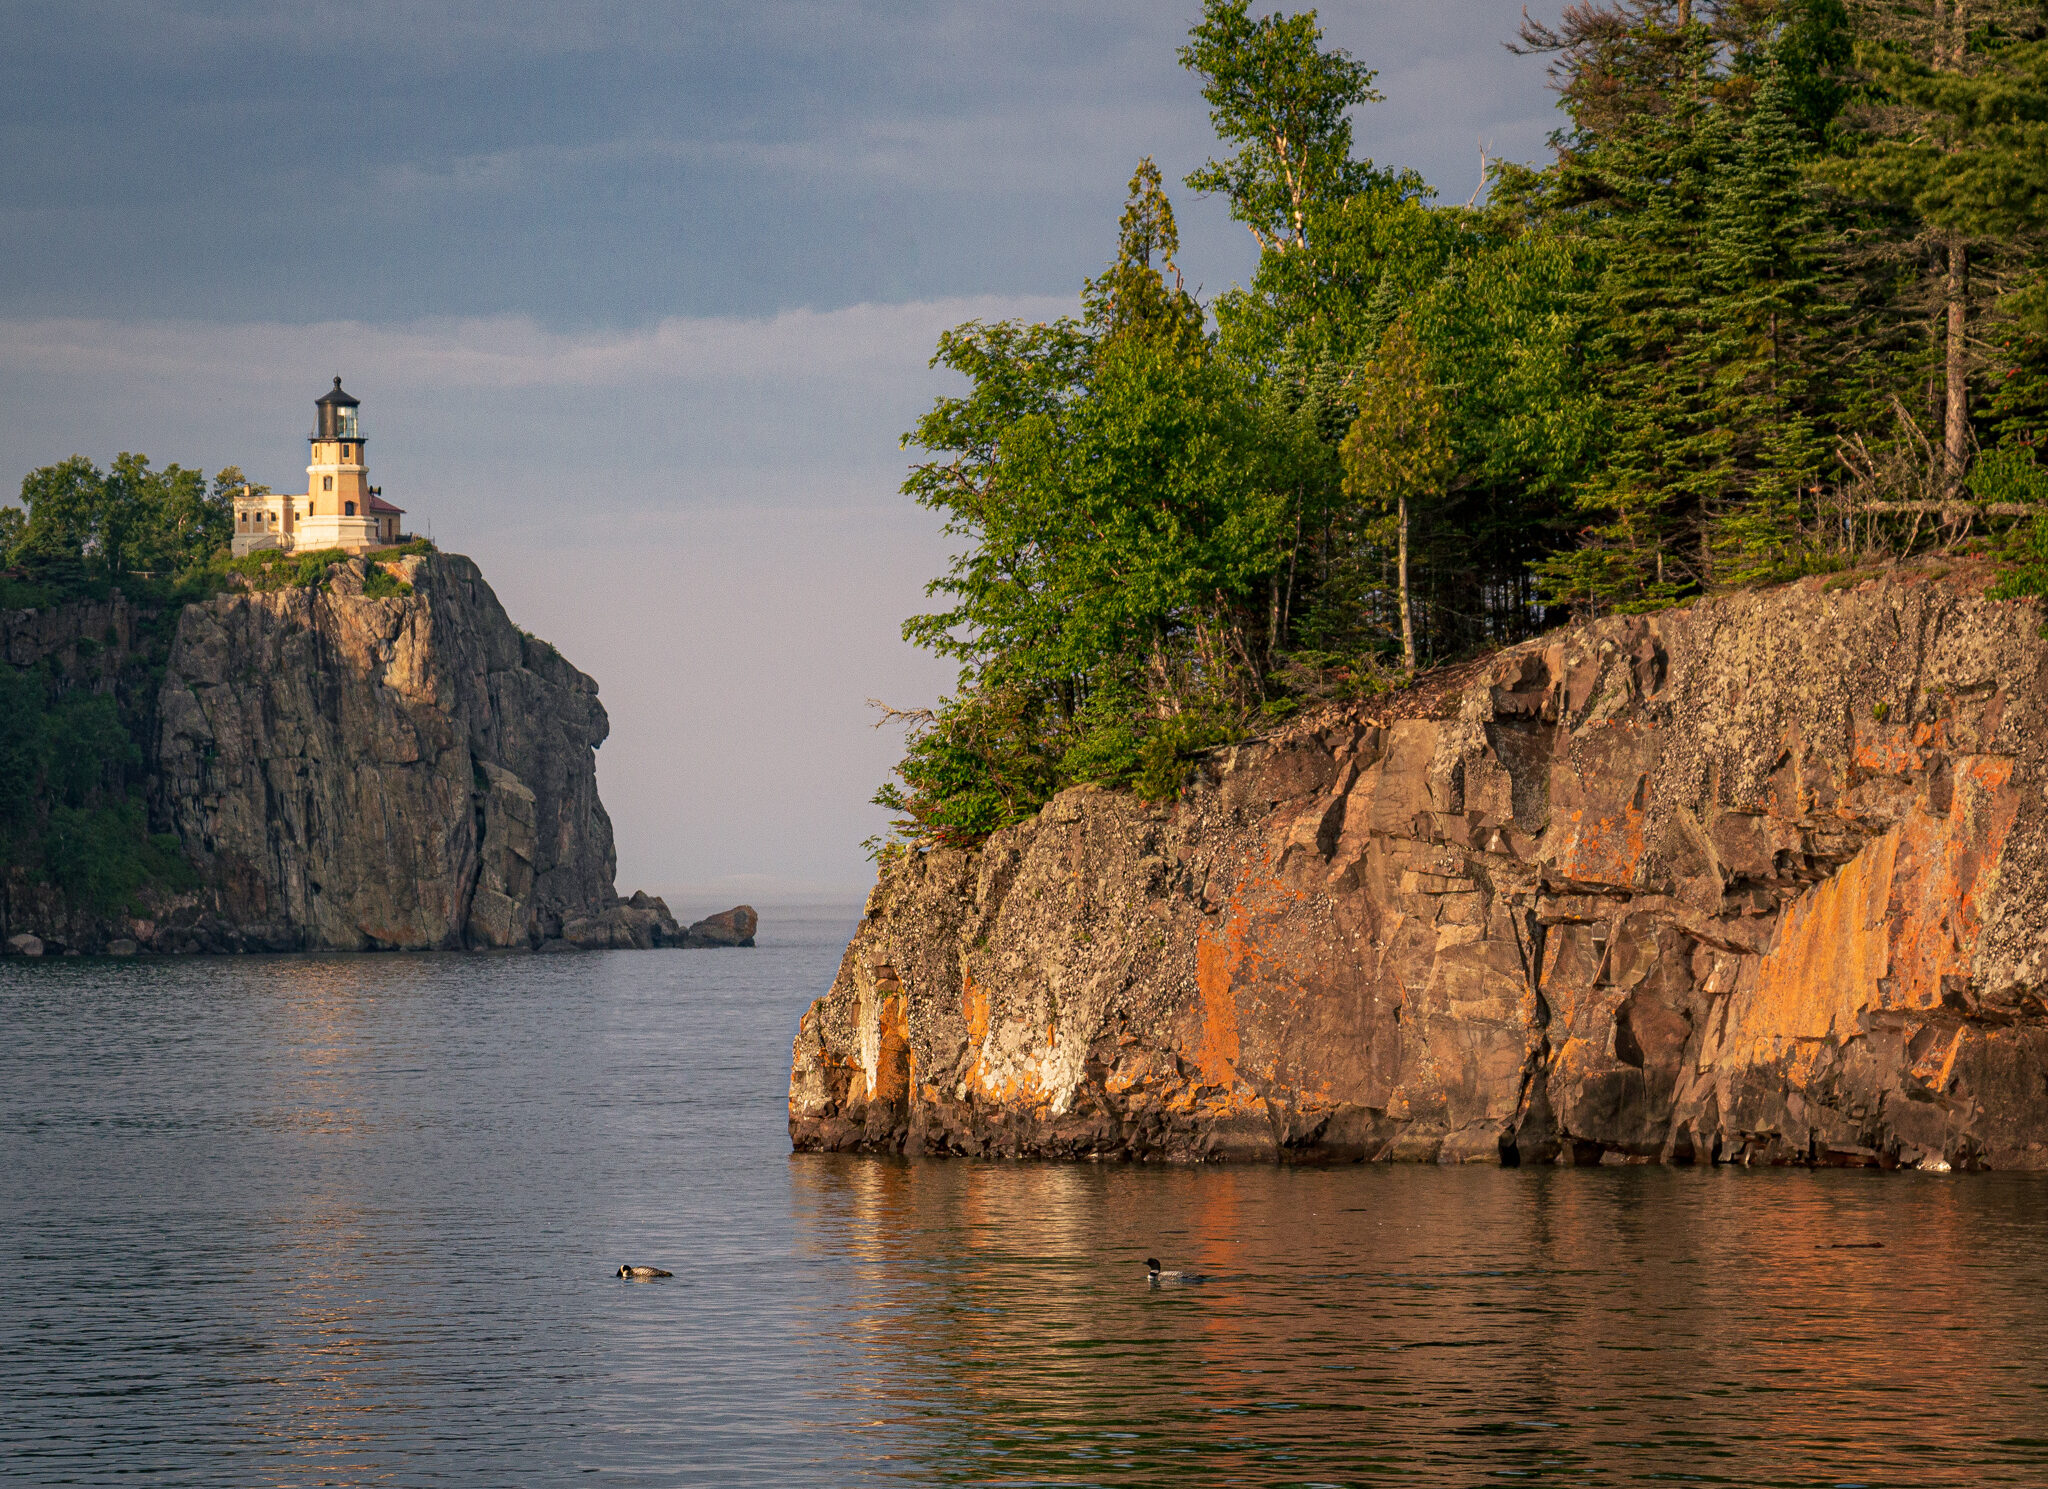 Image of a rocky shore on Lake Superior with loons in the water. In the backgrounders is Split Rock Lighthouse on a cliff overlooking Lake Superior.